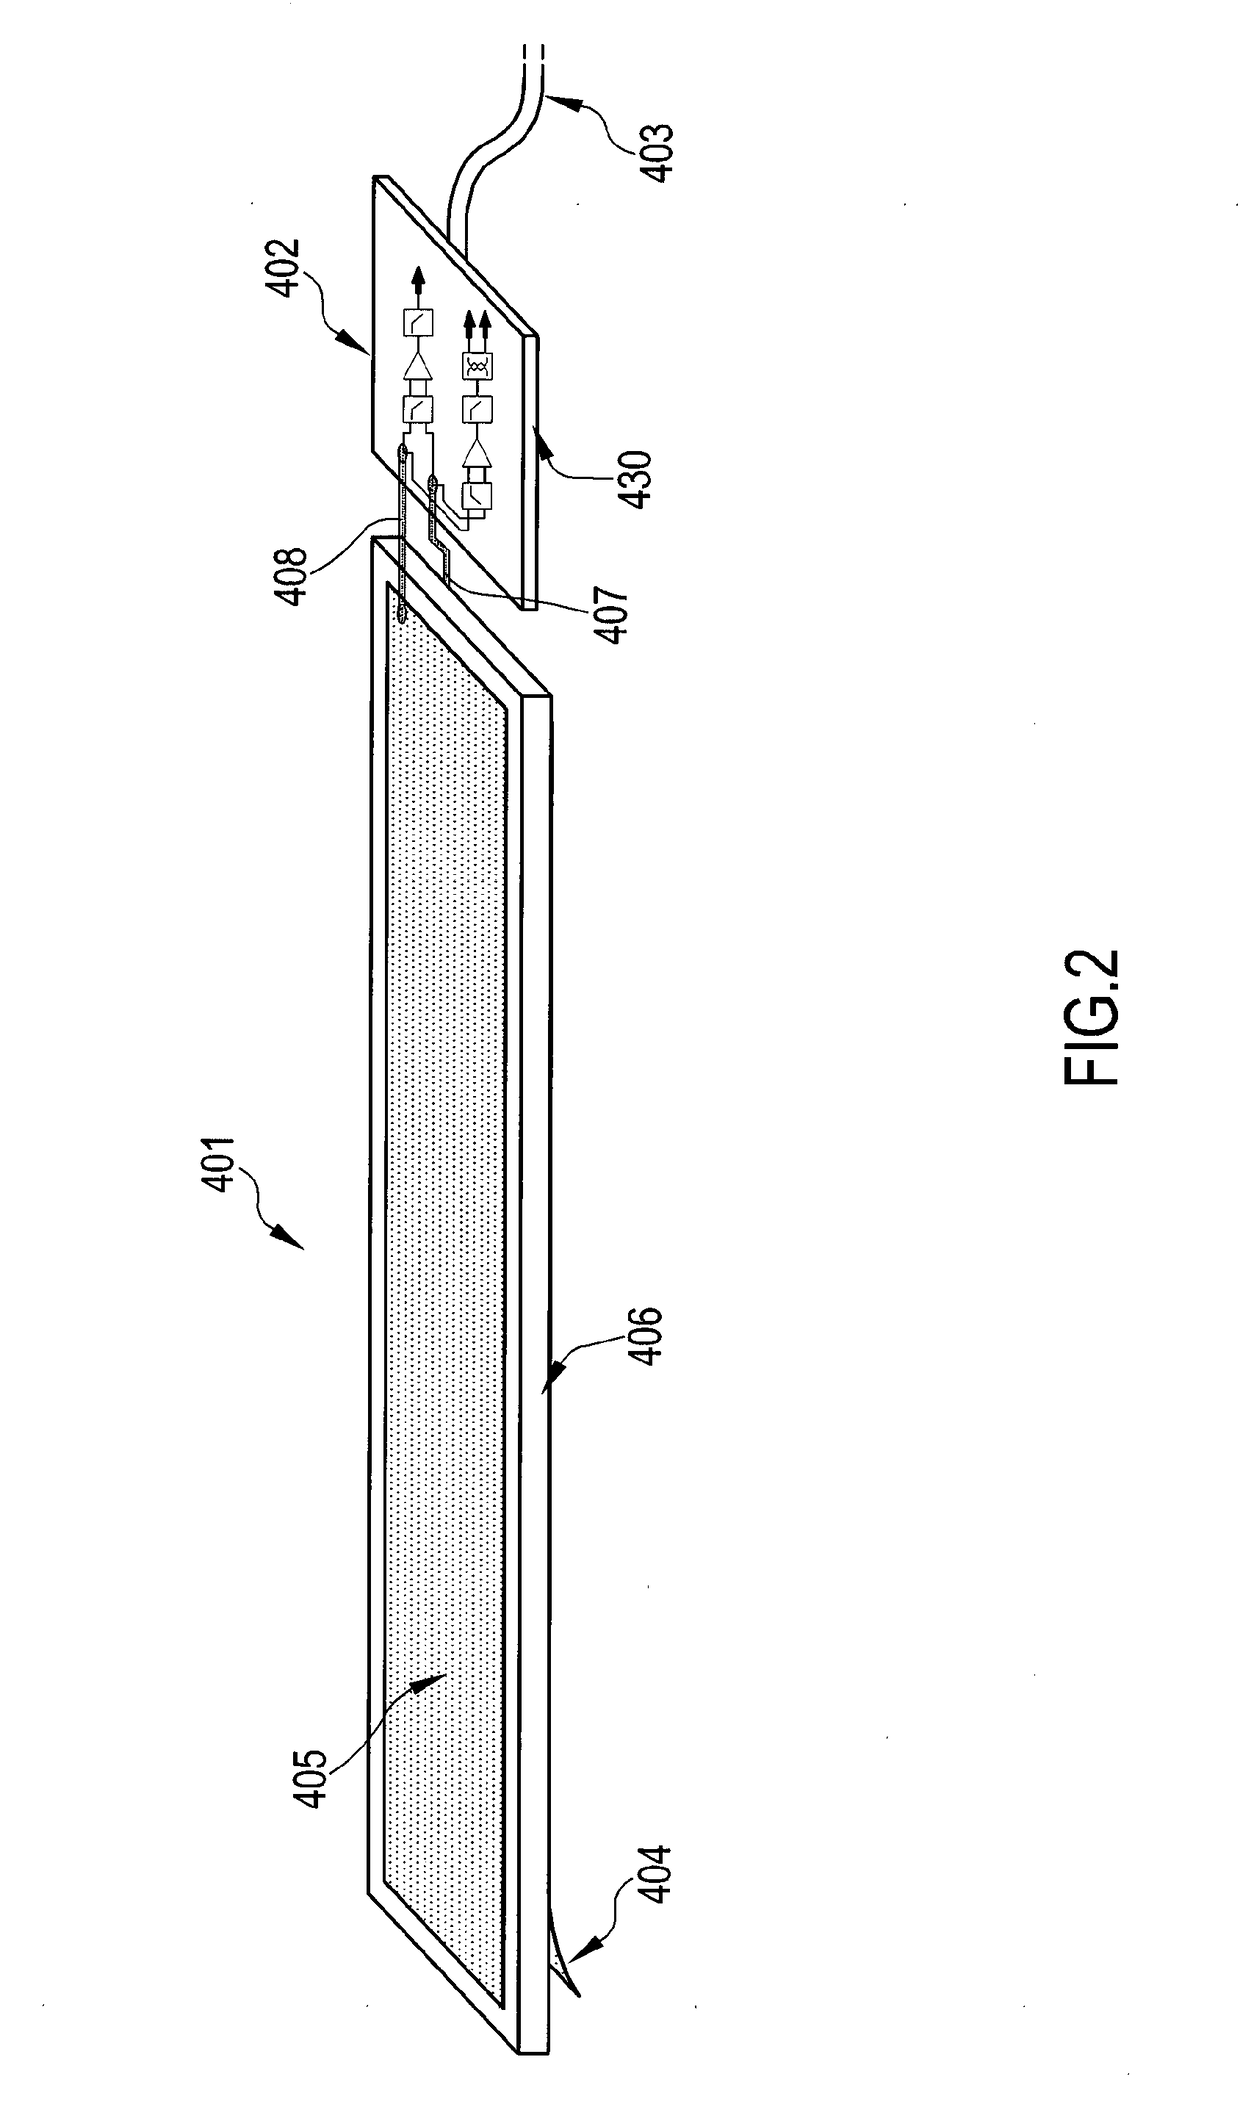 Partial discharge acquisition system comprising a capacitive coupling electric field sensor